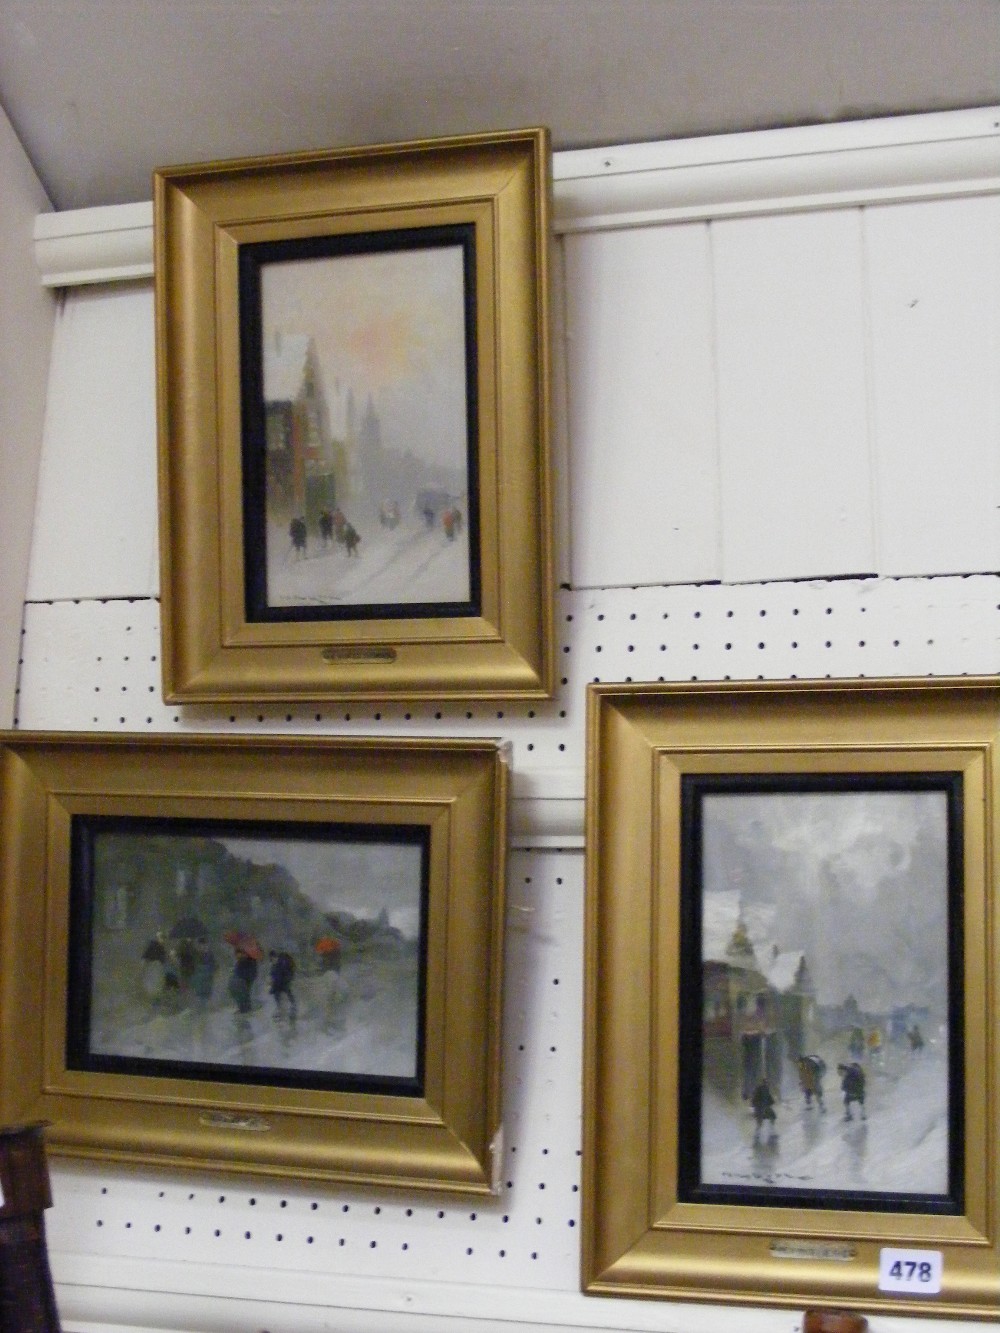 Three pictures of winter scenes entitled 'A Winter's Evening', 'When Winter Reigns' and 'A Rainy